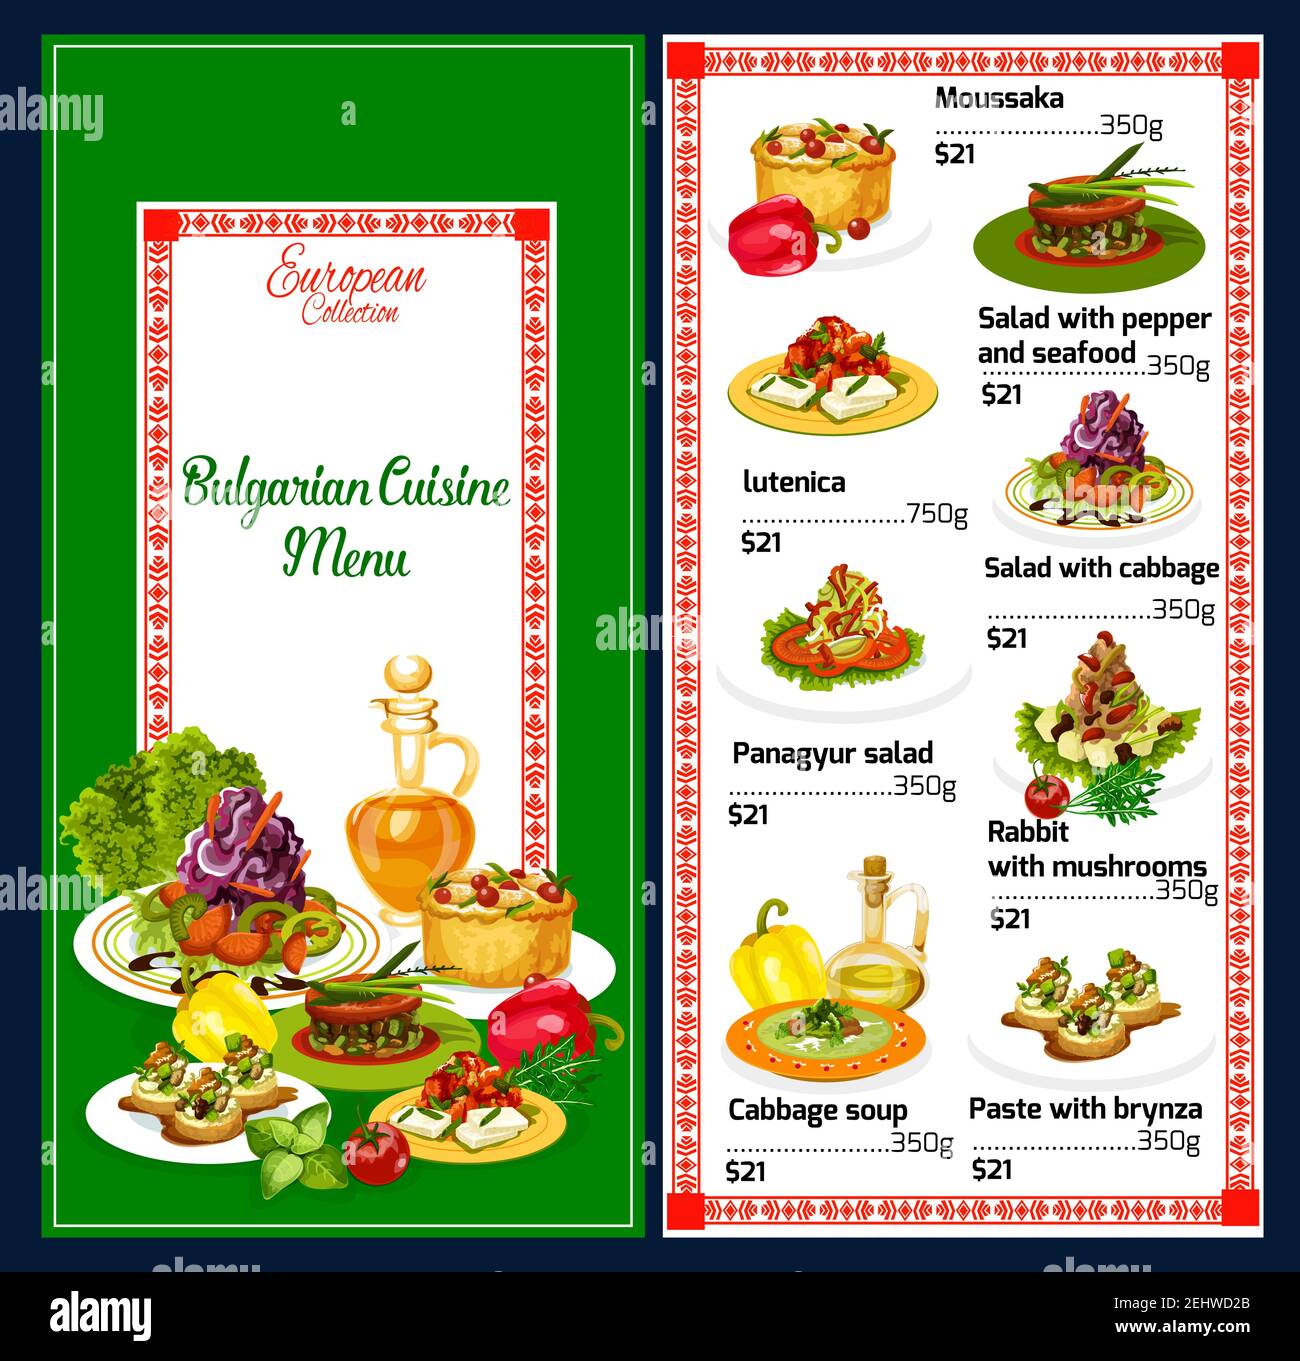 Bulgarian cuisine traditional Balkan menu. Vector moussaka, lutenica or cabbage salad and soup, seafood, panagyur or panagyurishte with rabbit and mus Stock Vector